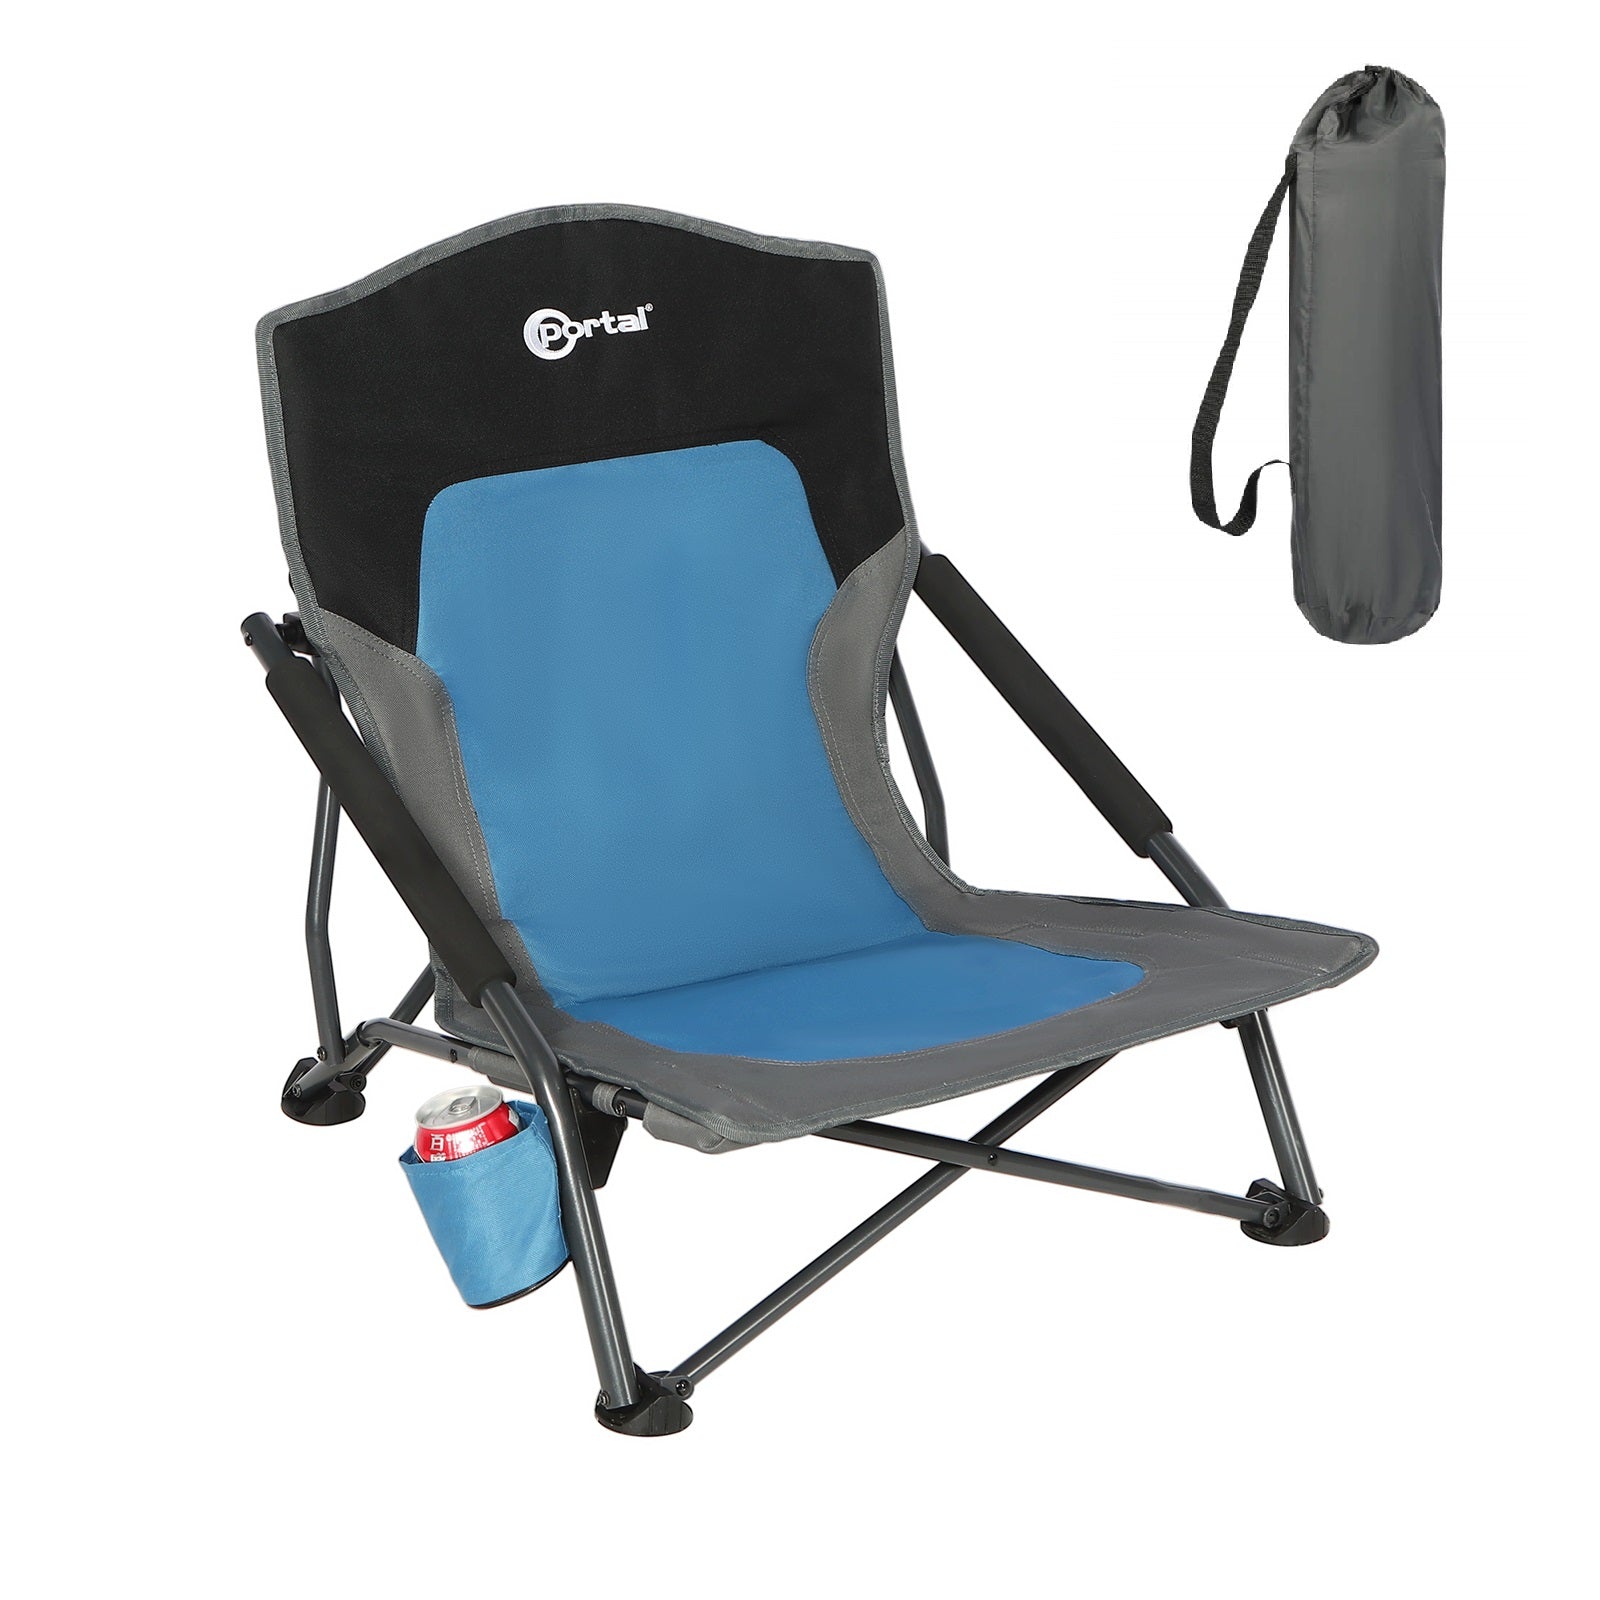 Outdoor Folding Chair | Lightweight, Compact, & Portable Design with  Storage Carry Bag | Quick Setup, Heavy Duty, & Comfortable Chair for  Camping